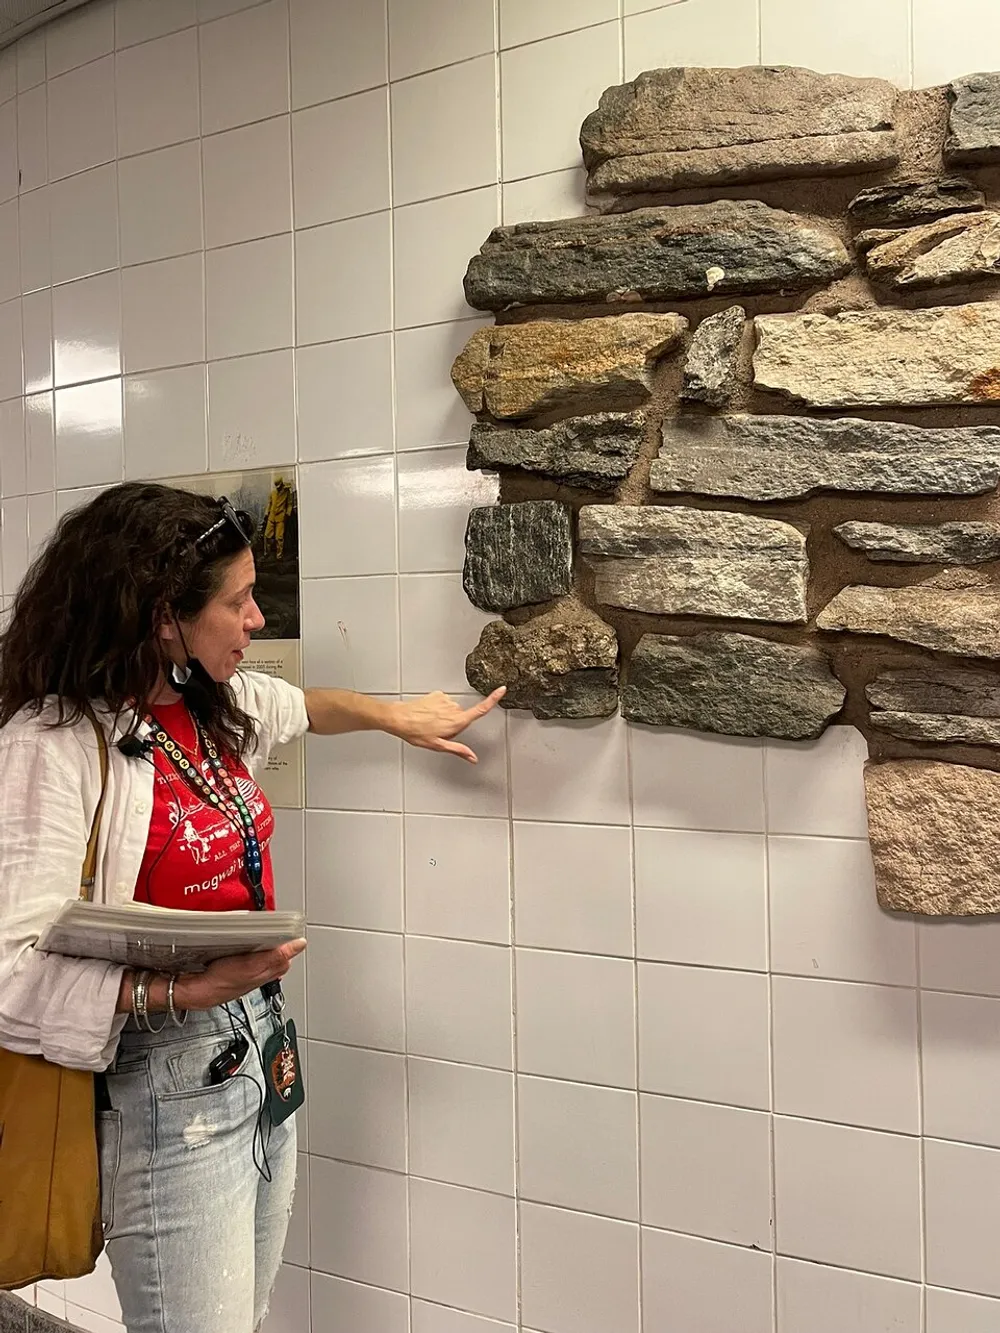 A woman is pointing to a section of a wall that transitions from smooth white tiles to a rough stone surface giving the illusion that the stones are emerging from the tiled wall